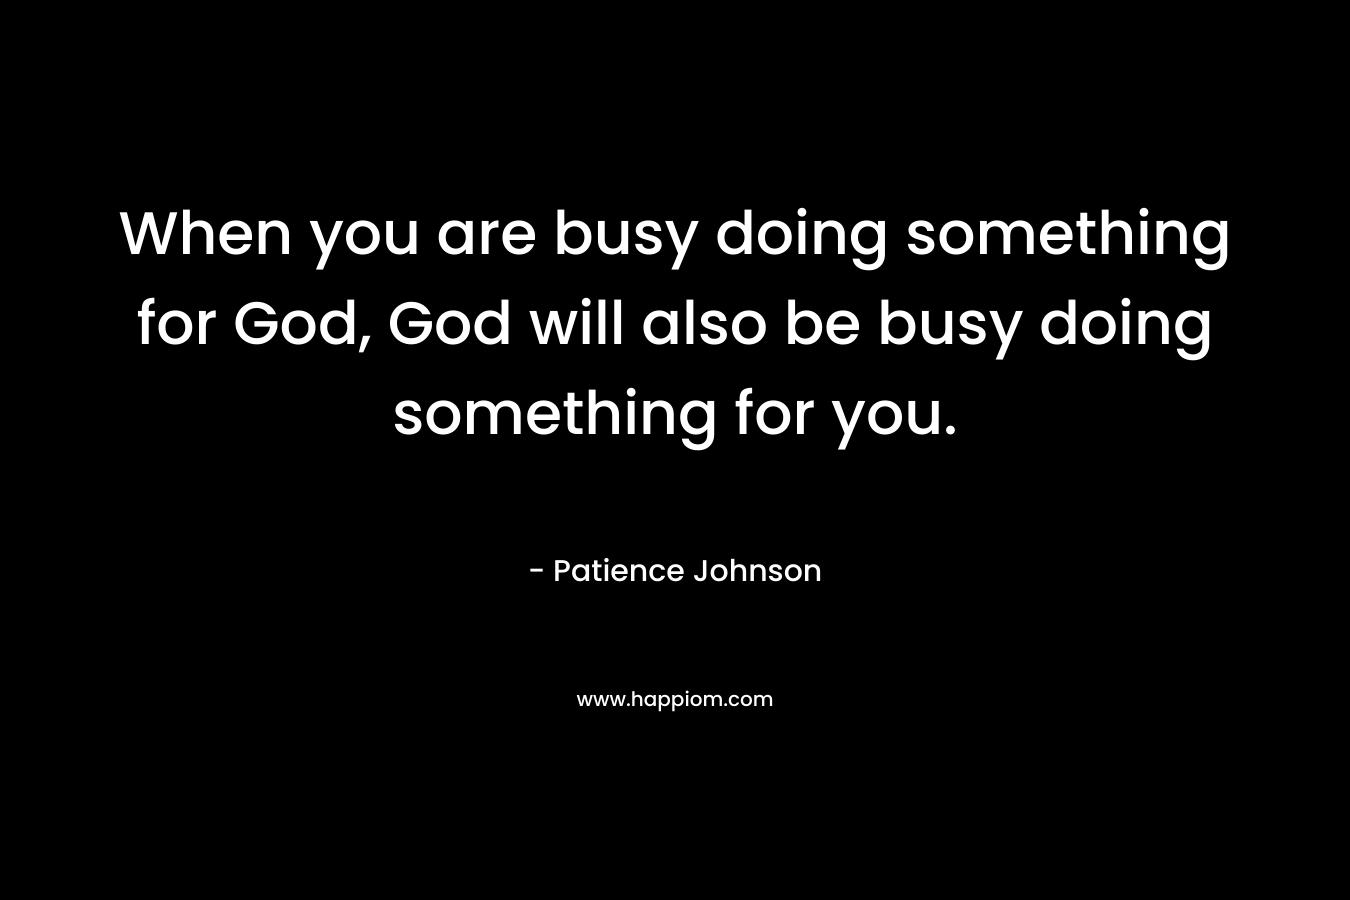 When you are busy doing something for God, God will also be busy doing something for you.